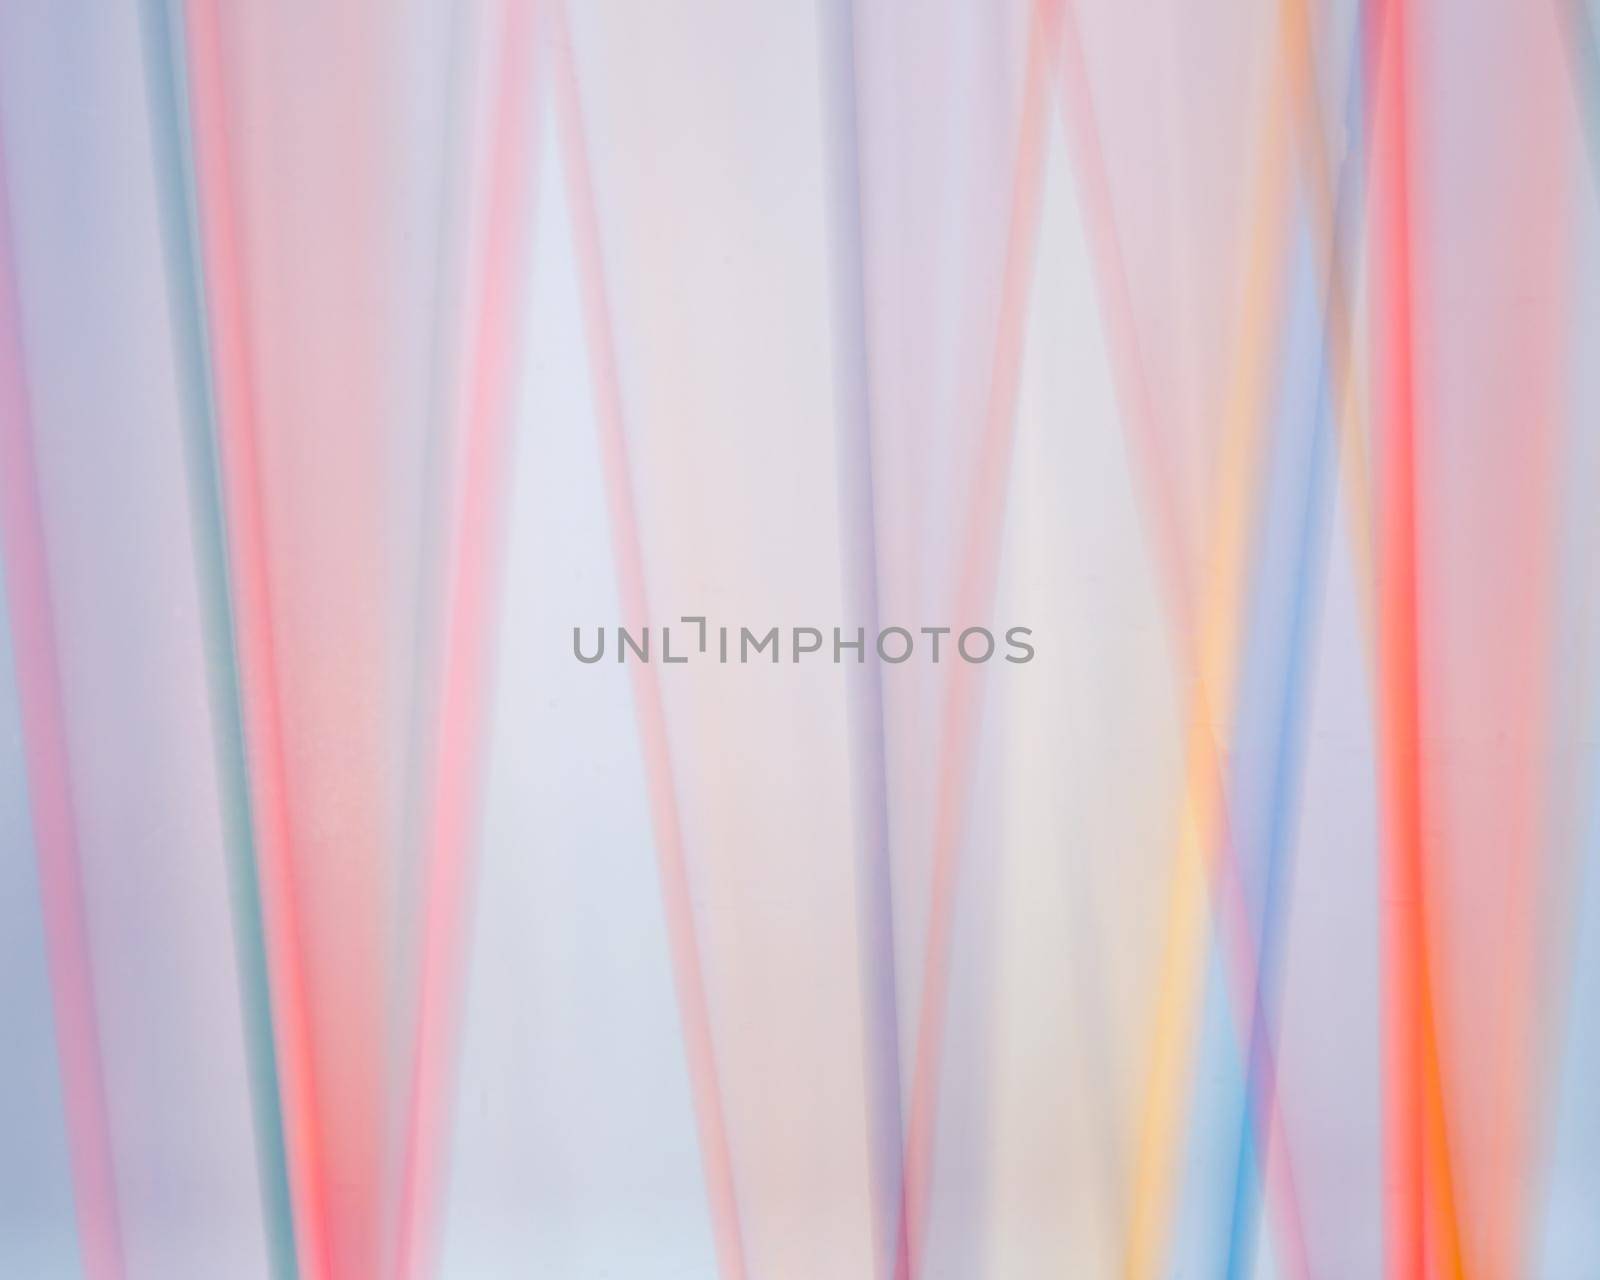 Colored dowels blurred against a white background in a time lapse photo.